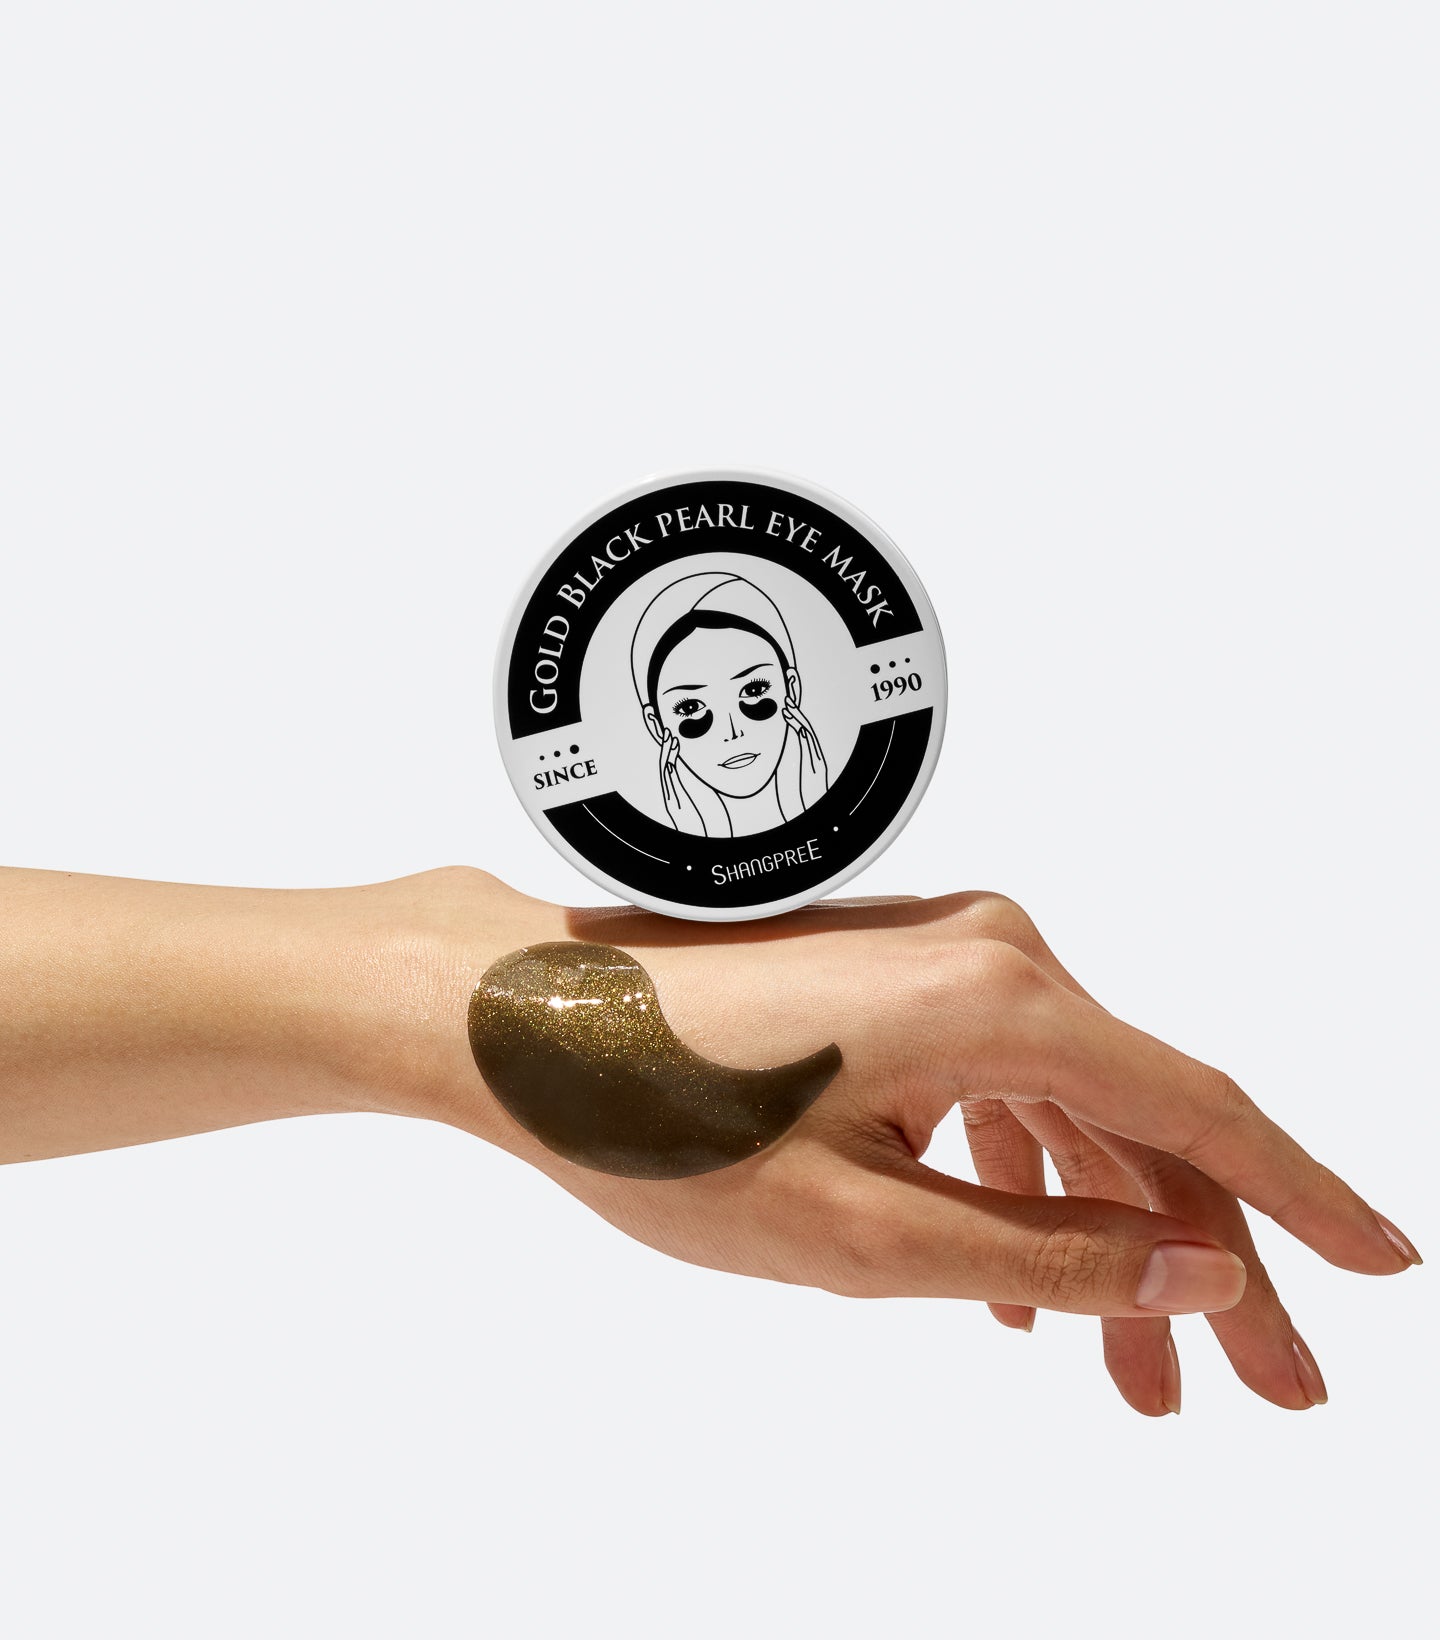 Someone balances a container of Shangpree Gold Black Pearl Eye Mask on the back of their hand, with one of the eye masks applied to their hand, showing how the product sticks and molds to the skin